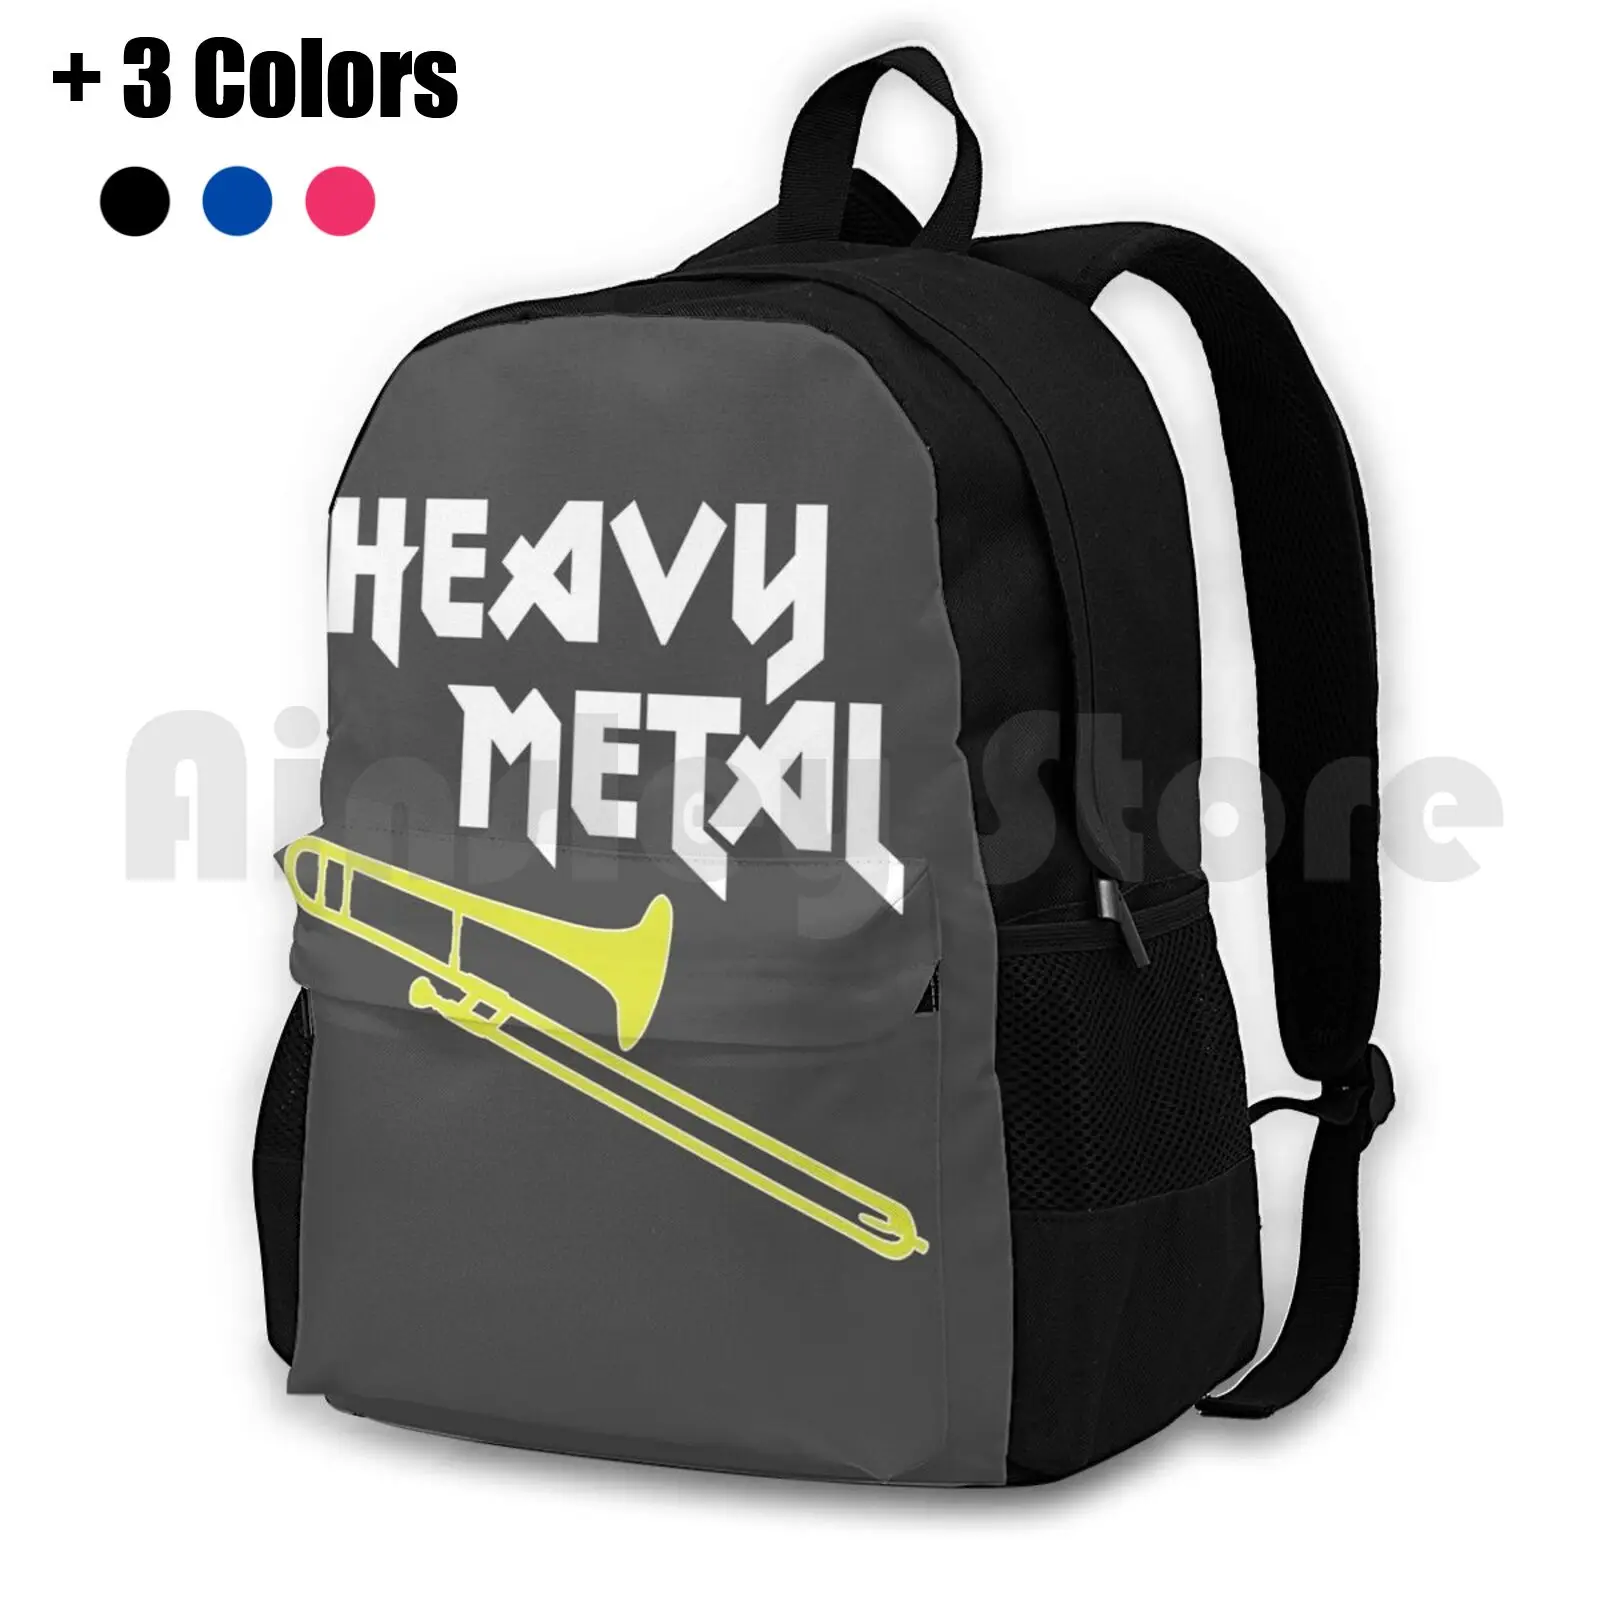 

Funny Trombone Gift , Marching Band , Concert Band-Heavy Metal Outdoor Hiking Backpack Waterproof Camping Travel Trombone